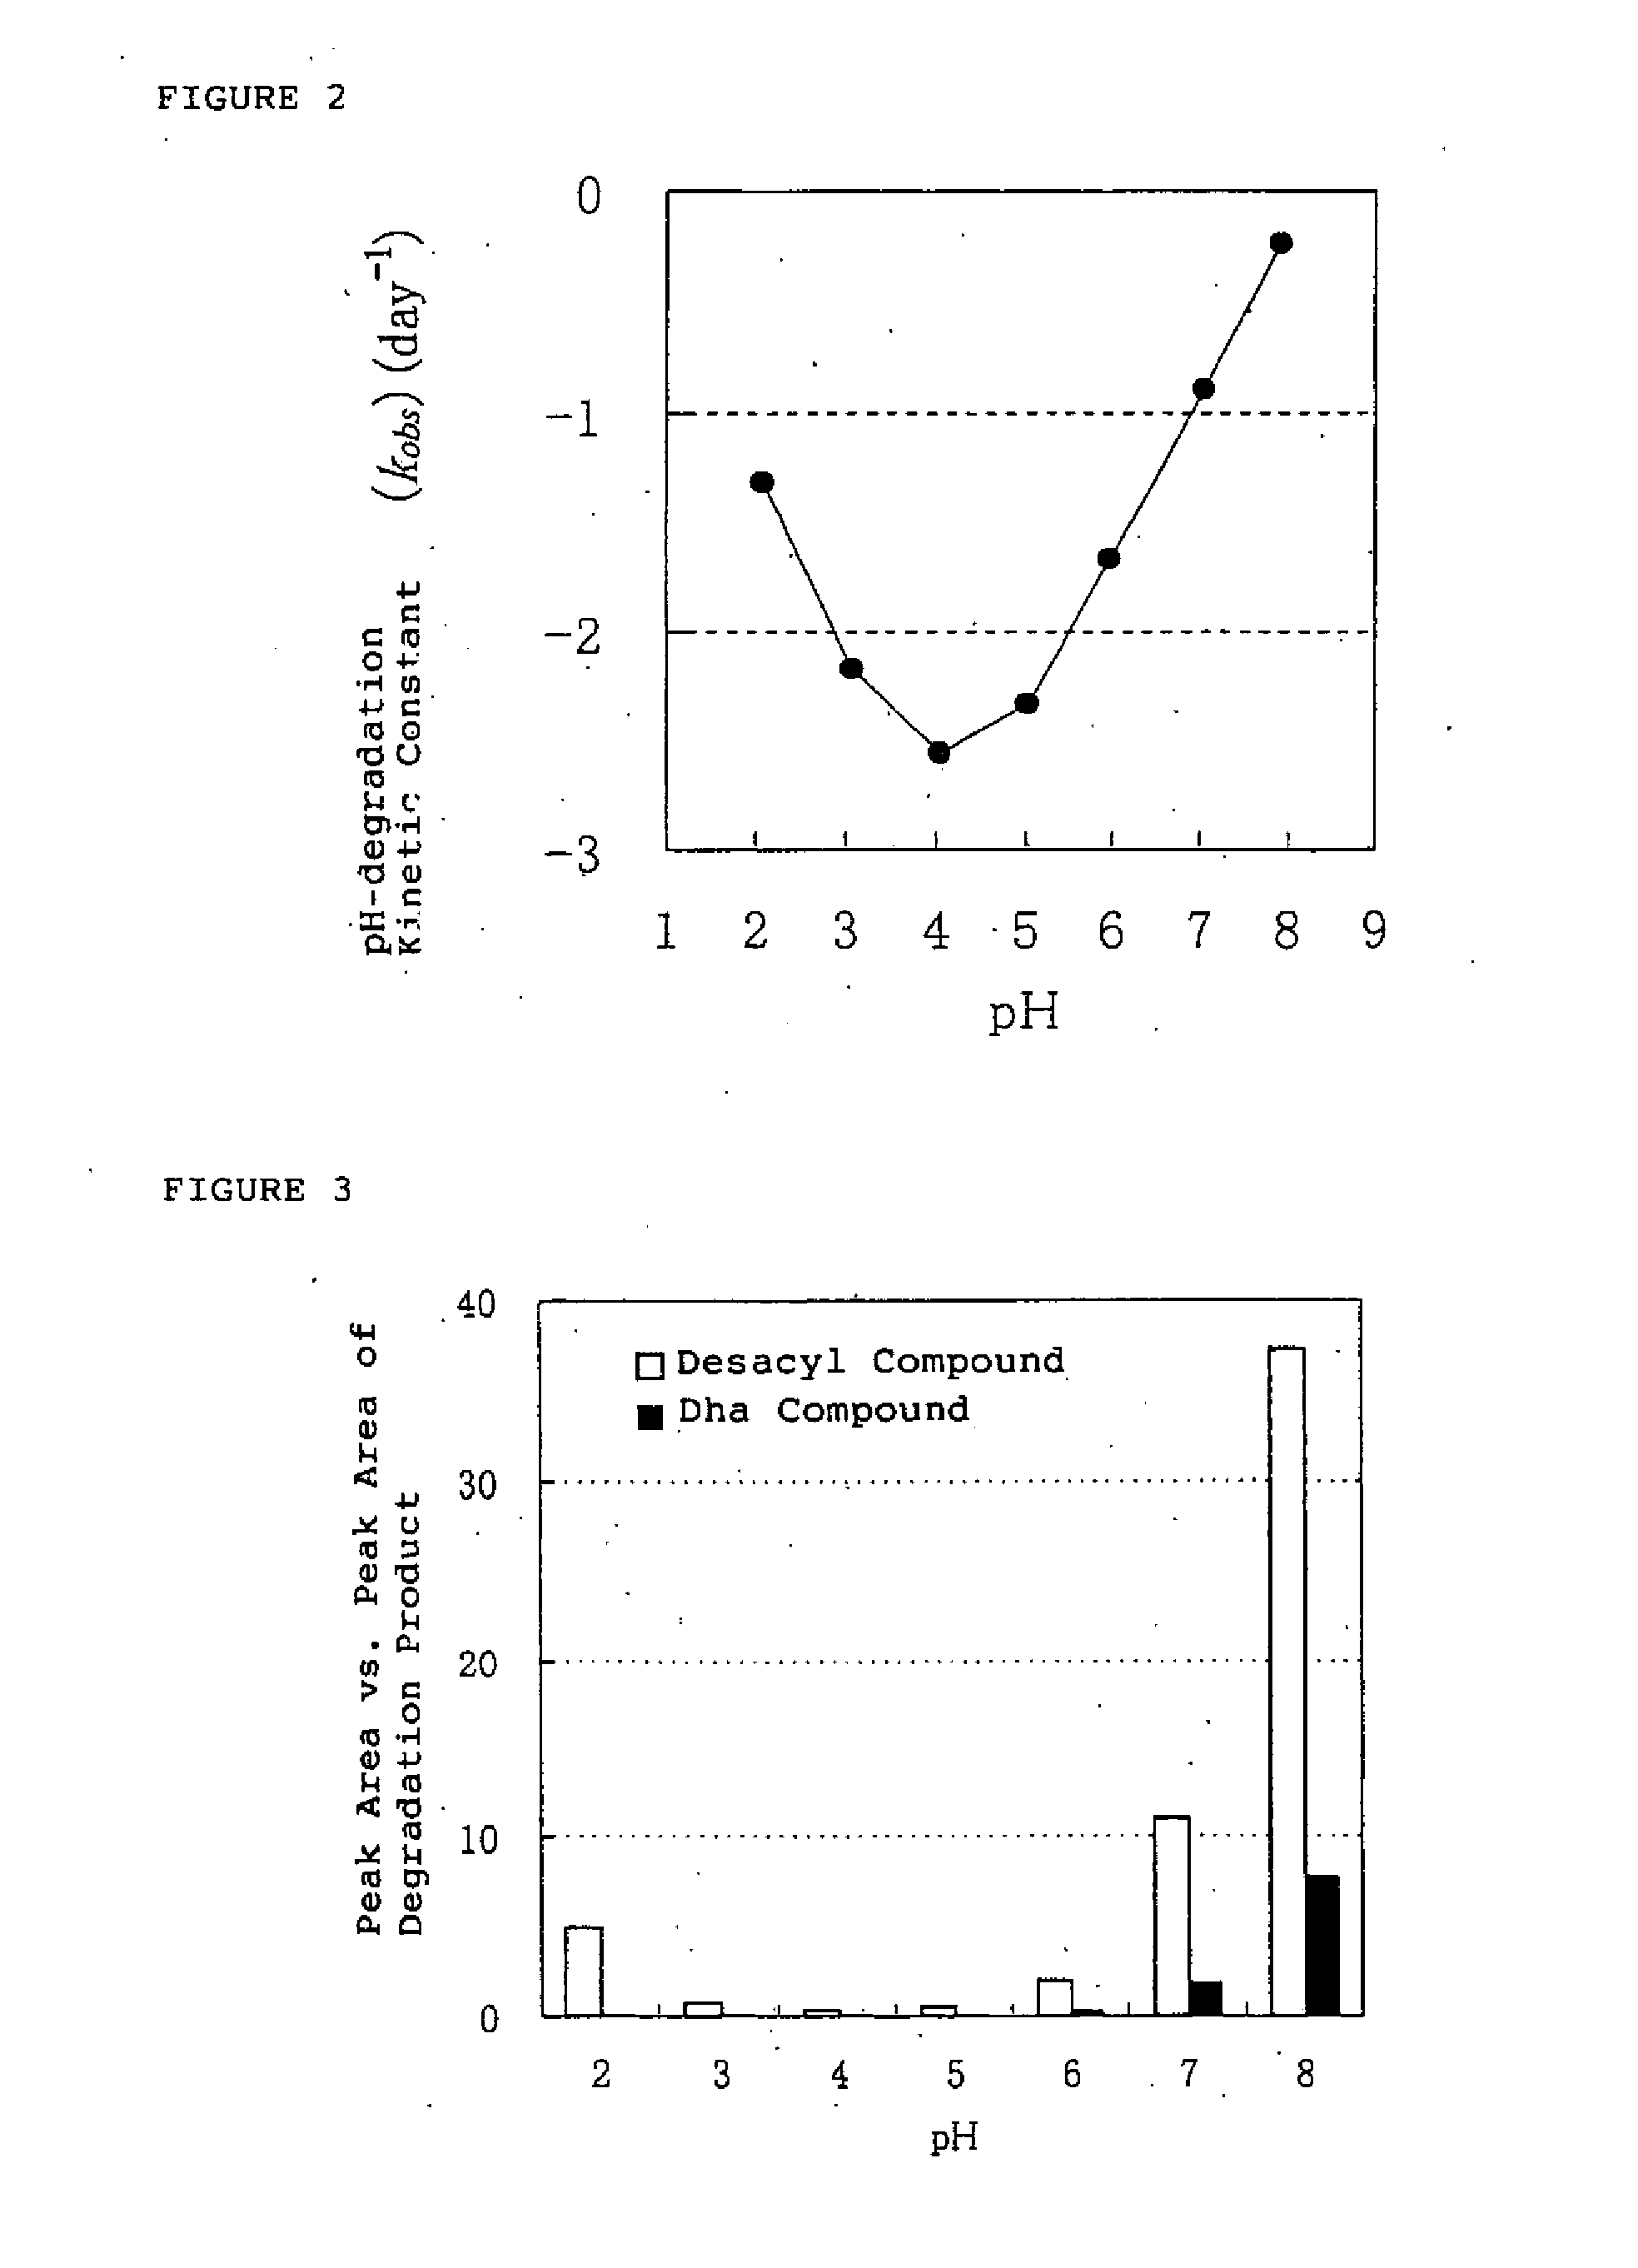 Medical compositions containing ghrelin